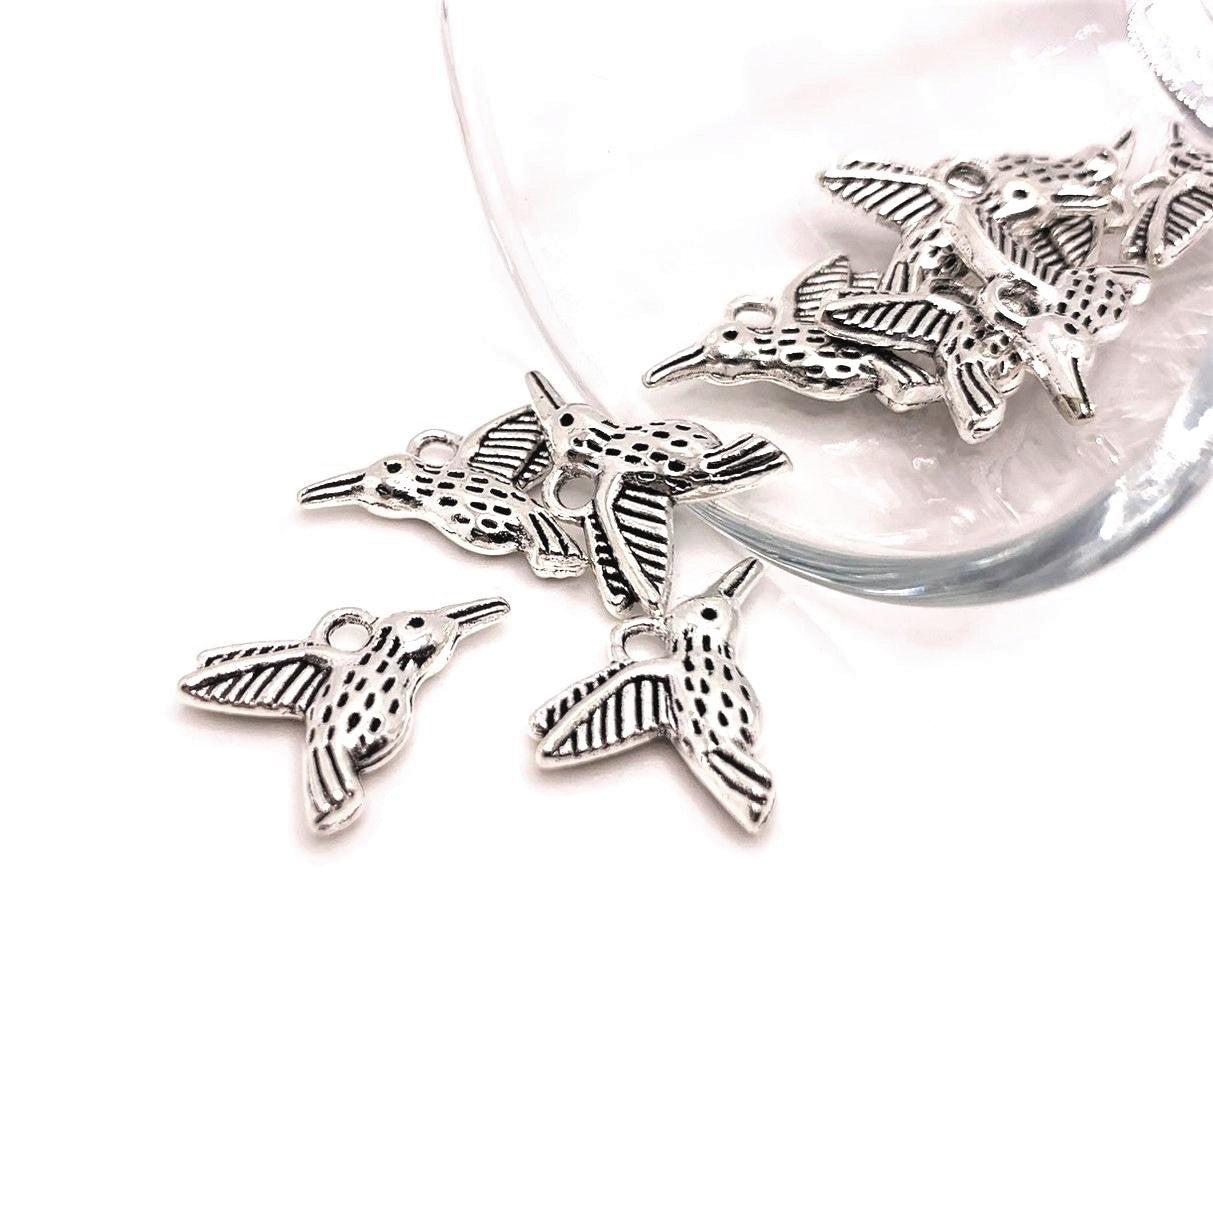 4, 20 or 50 Pieces: Small Silver Hummingbird Charms